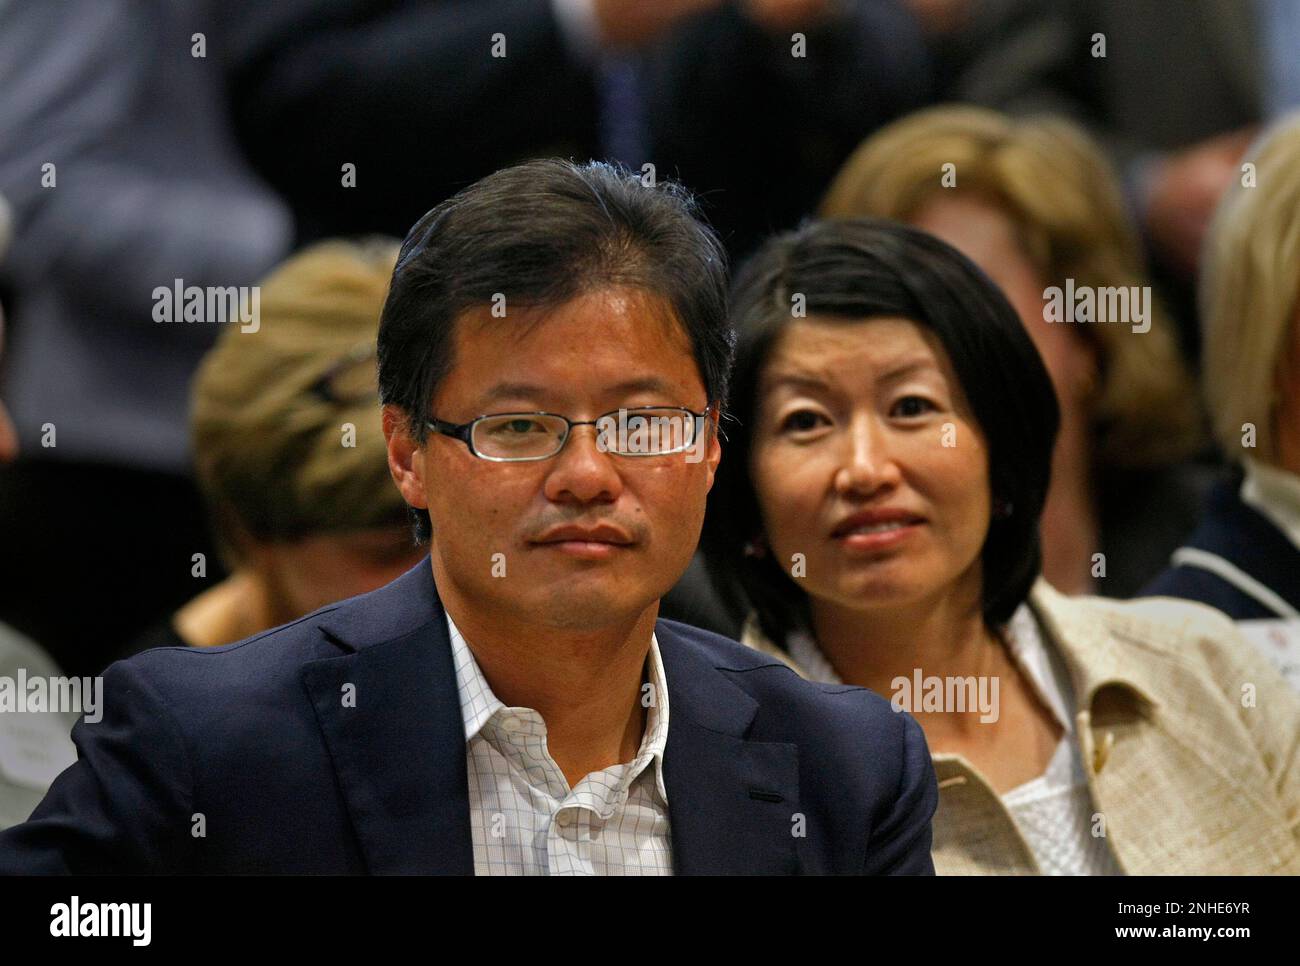 Yahoo CEO, Jerry Yang and his wife Akiko Yamazaki listening to speakers as they attend the dedication ceremony for the Jerry Yang and Akiko Yamazaki Environment and Energy building at Stanford University in Palo Alto, Calif., on Mar. 4, 2008. Photo by Michael Macor/ San Francisco Chronicle (Michael Macor/San Francisco Chronicle via AP) Stock Photo